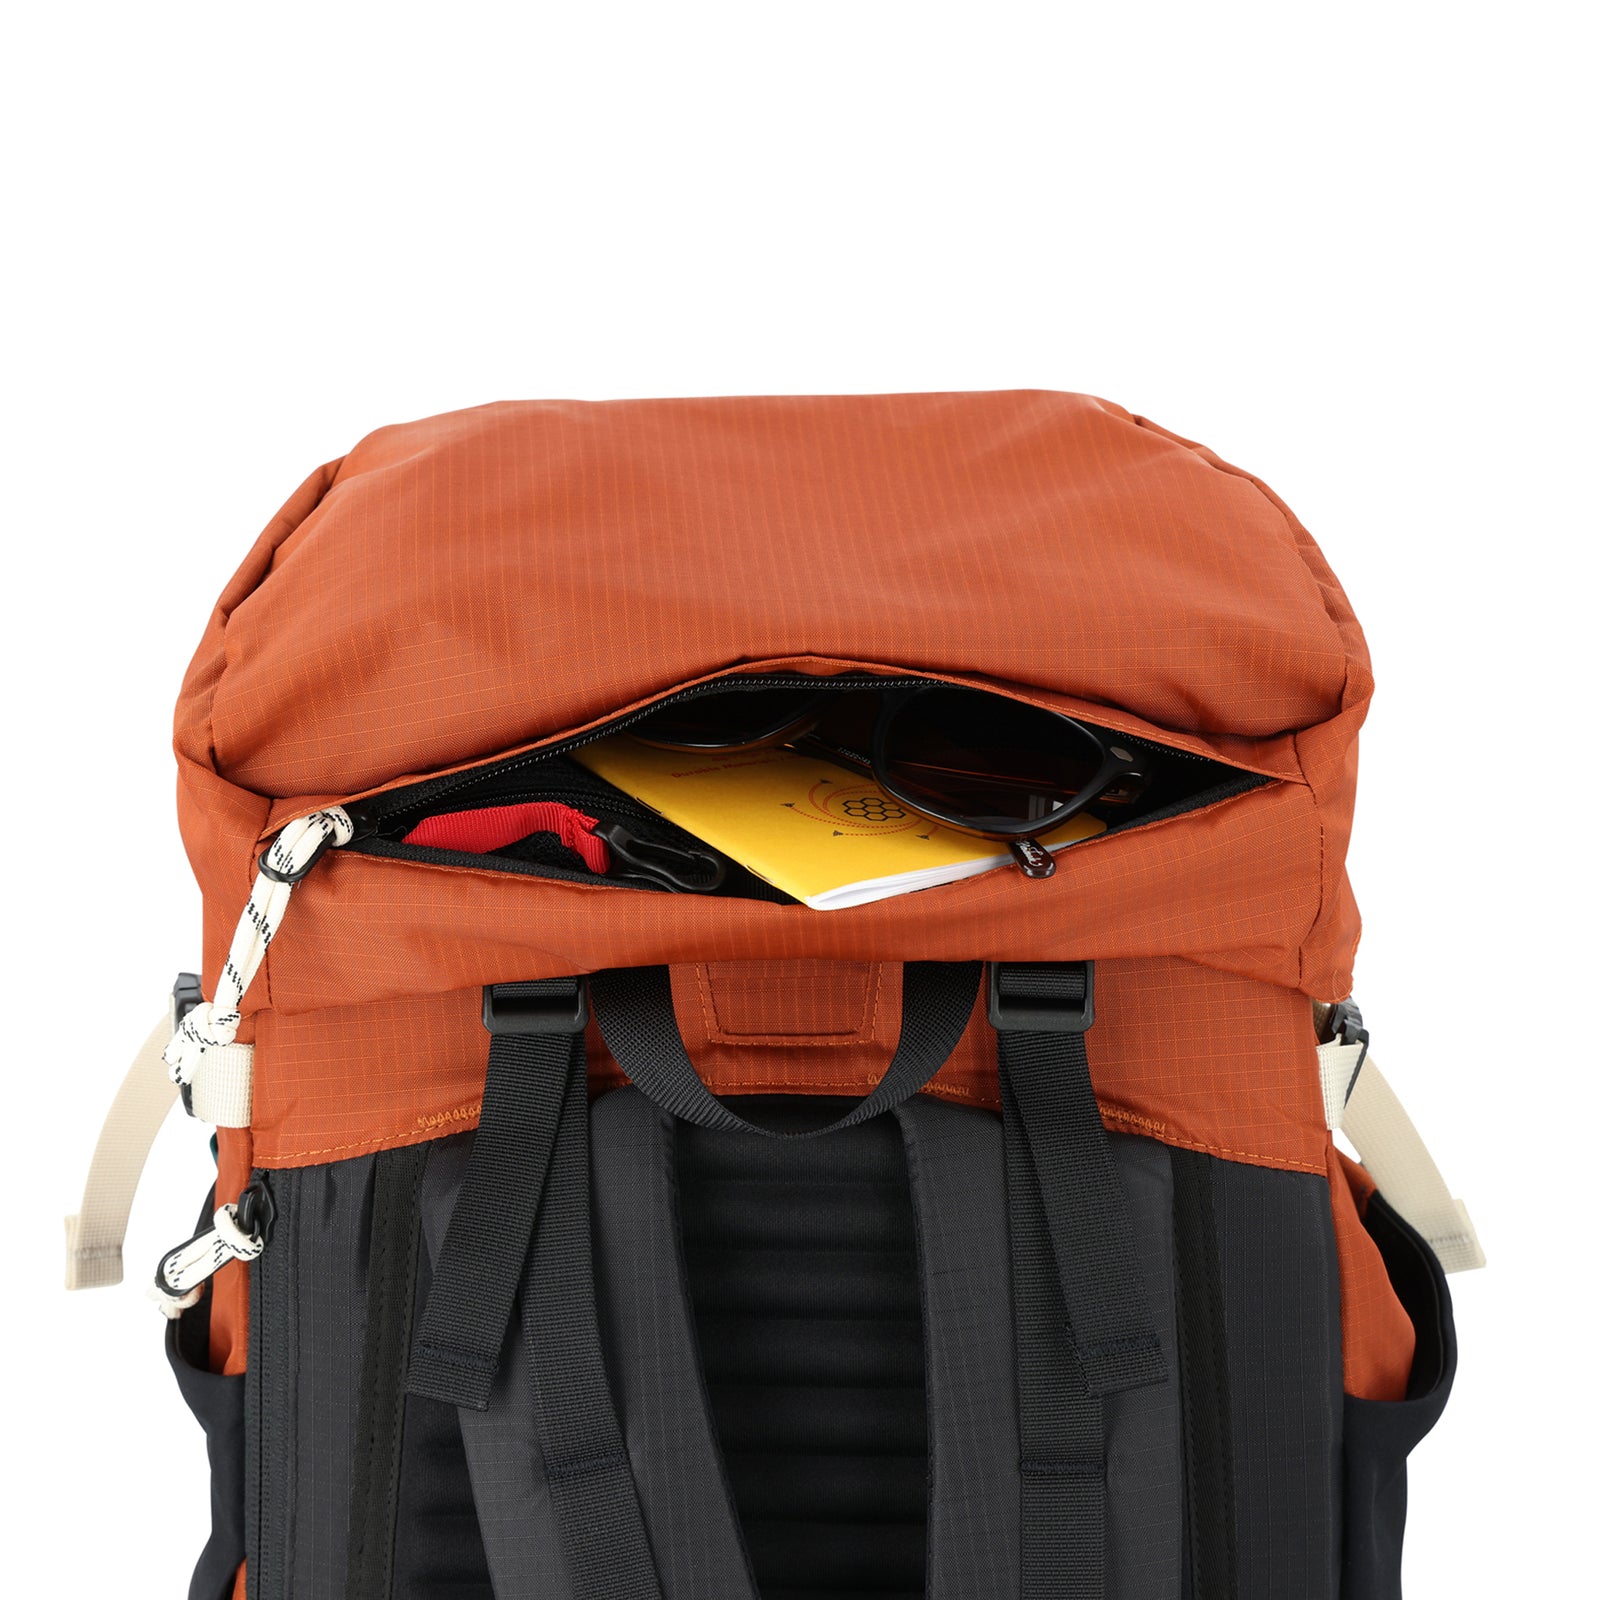 General shot of top zipper compartment and key clip on Topo Designs Mountain Pack 28L hiking backpack with external laptop sleeve access in lightweight recycled clay orange black nylon.